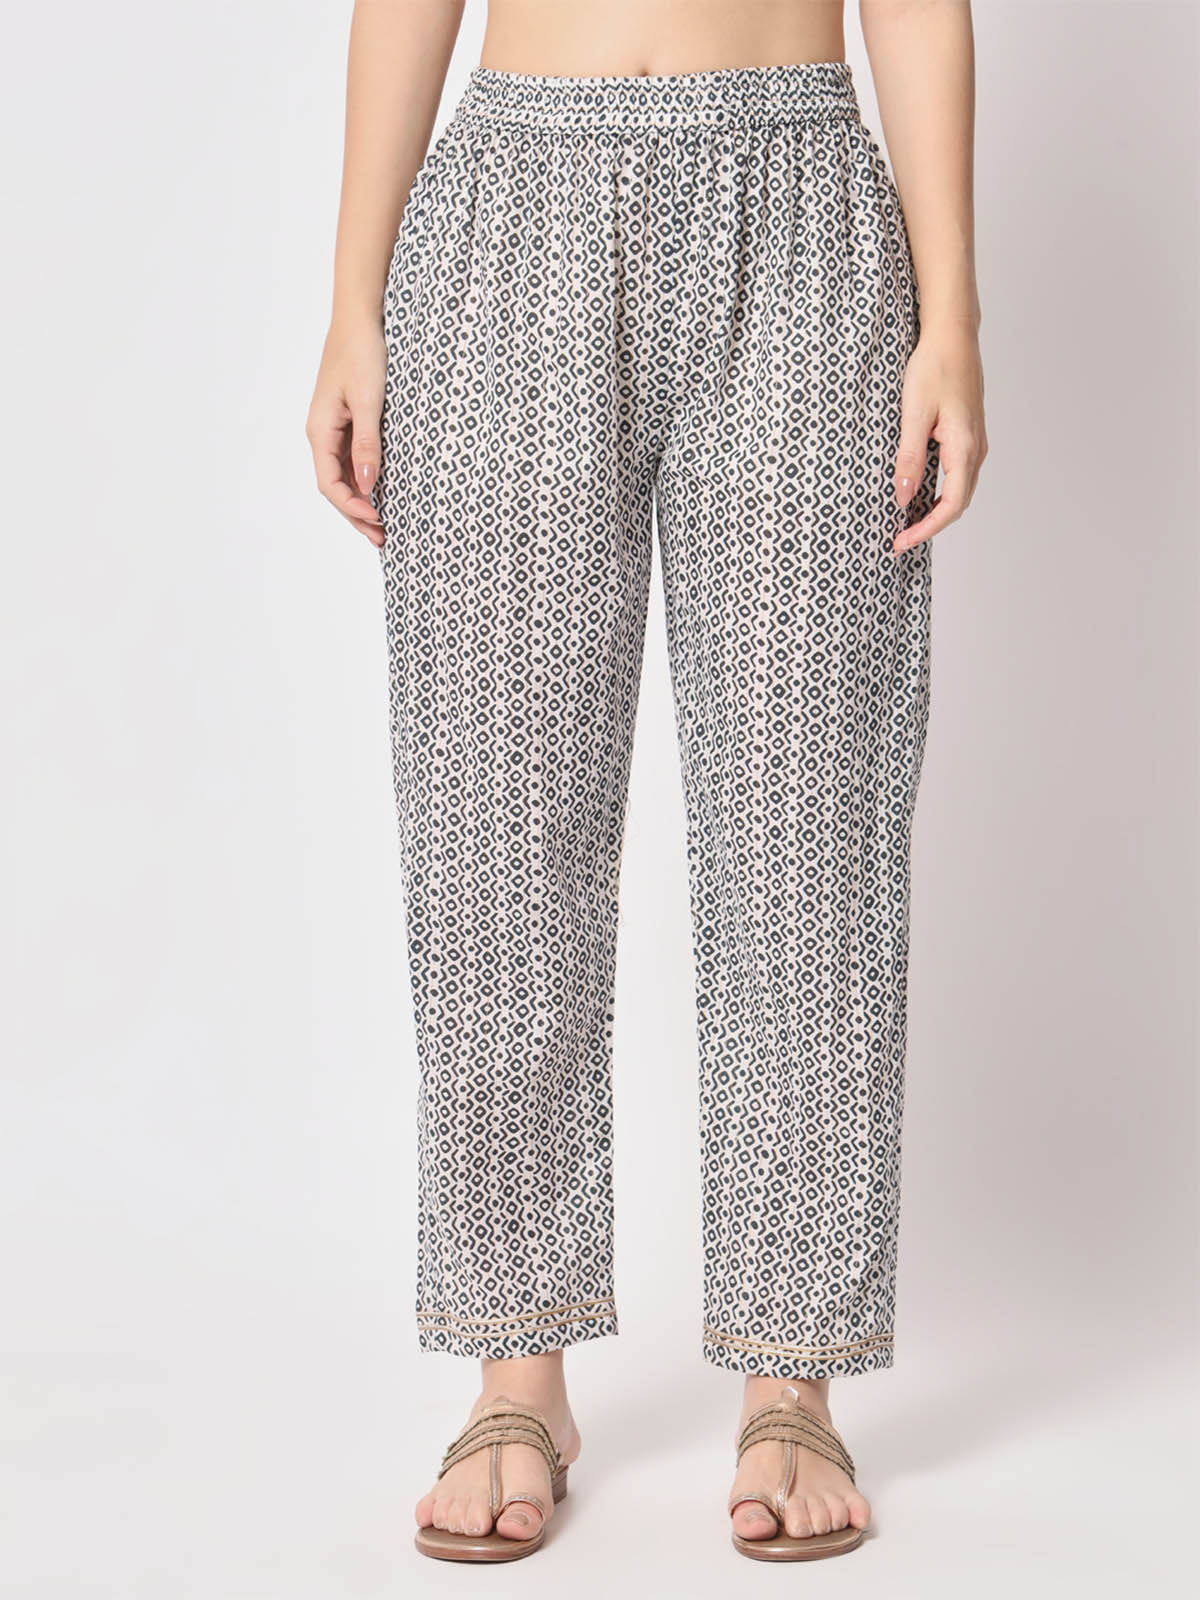 Odette - Black and White Cotton Printed Stitched Pant